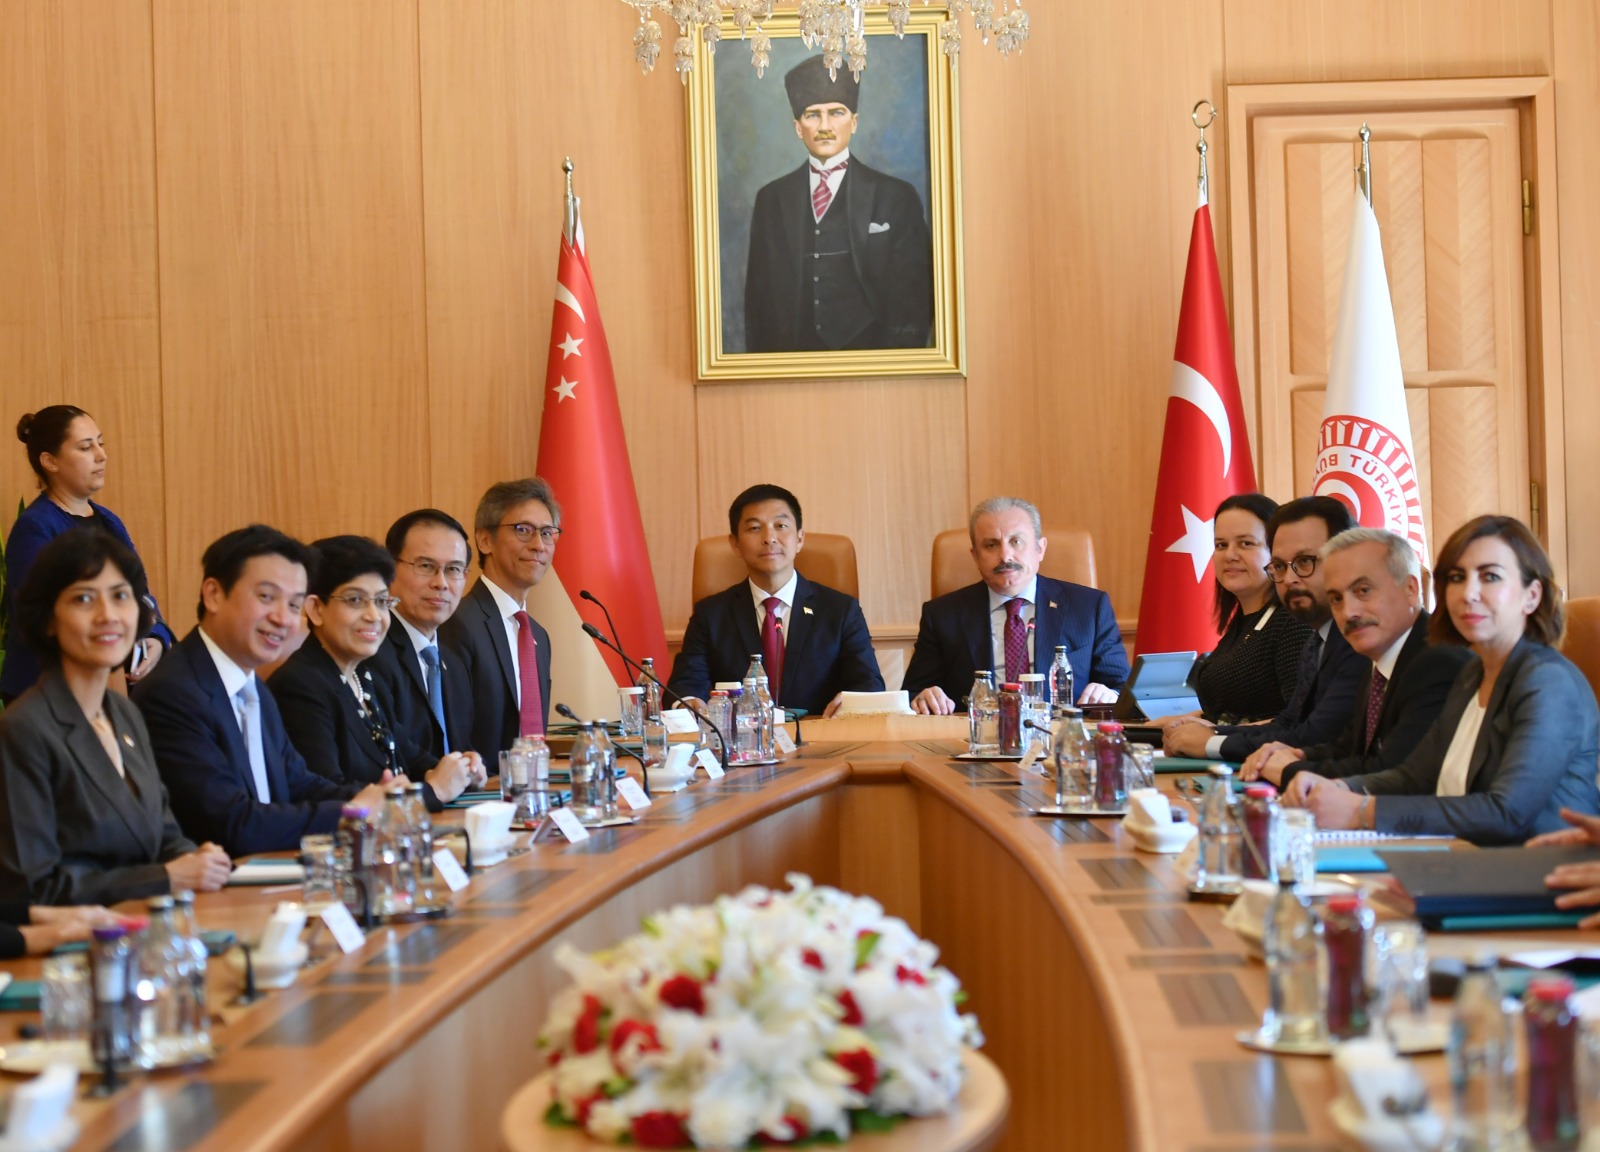 Singapore Delegation meeting the Turkish Speaker and MPs at TBMM